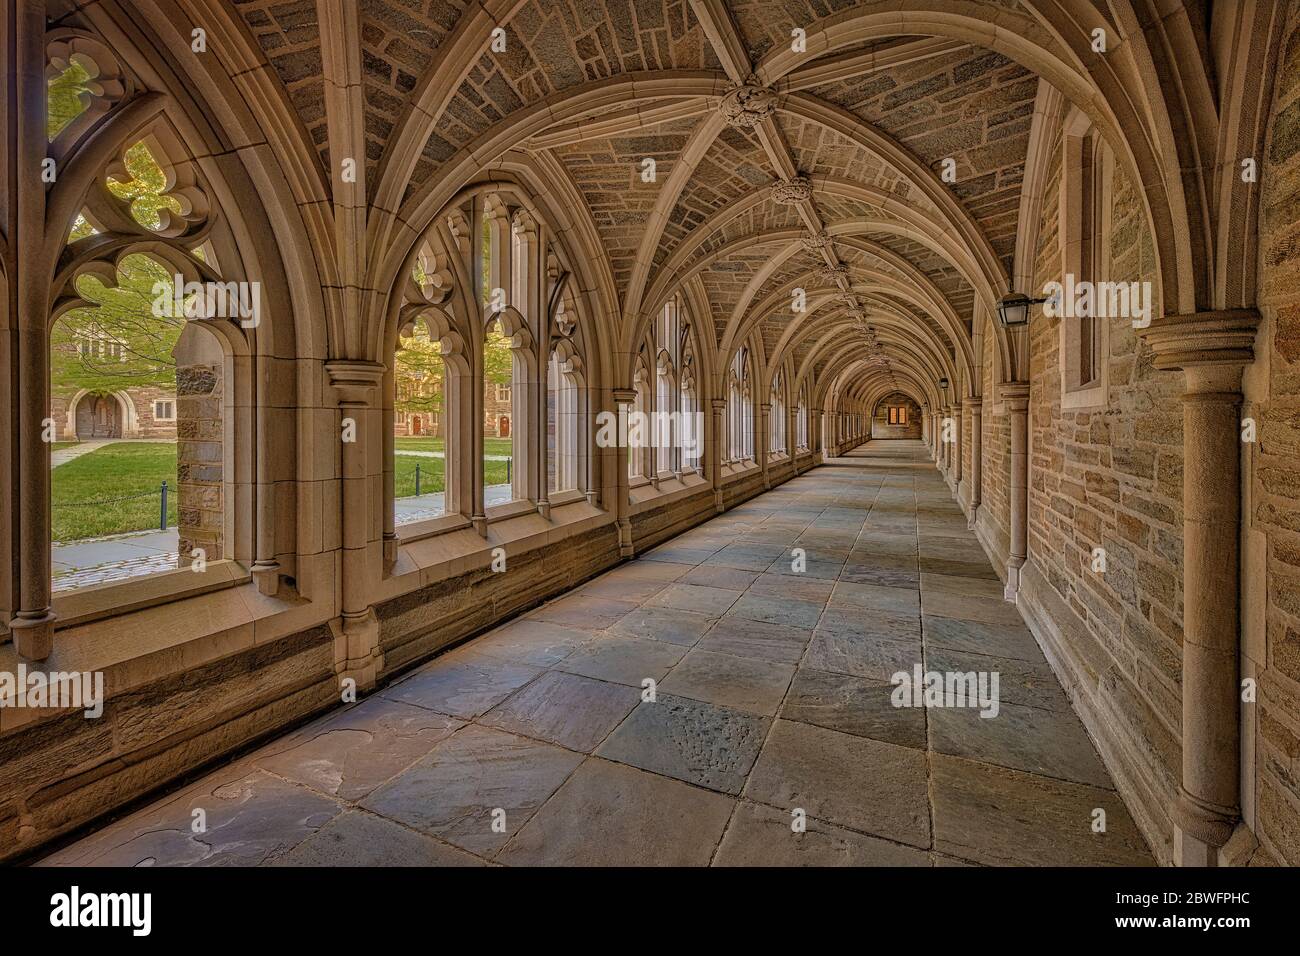 Princeton University Hallway NJ - A view to a perfect example of Collegiate Gothic architecture style.  Princeton University is a private Ivy League r Stock Photo